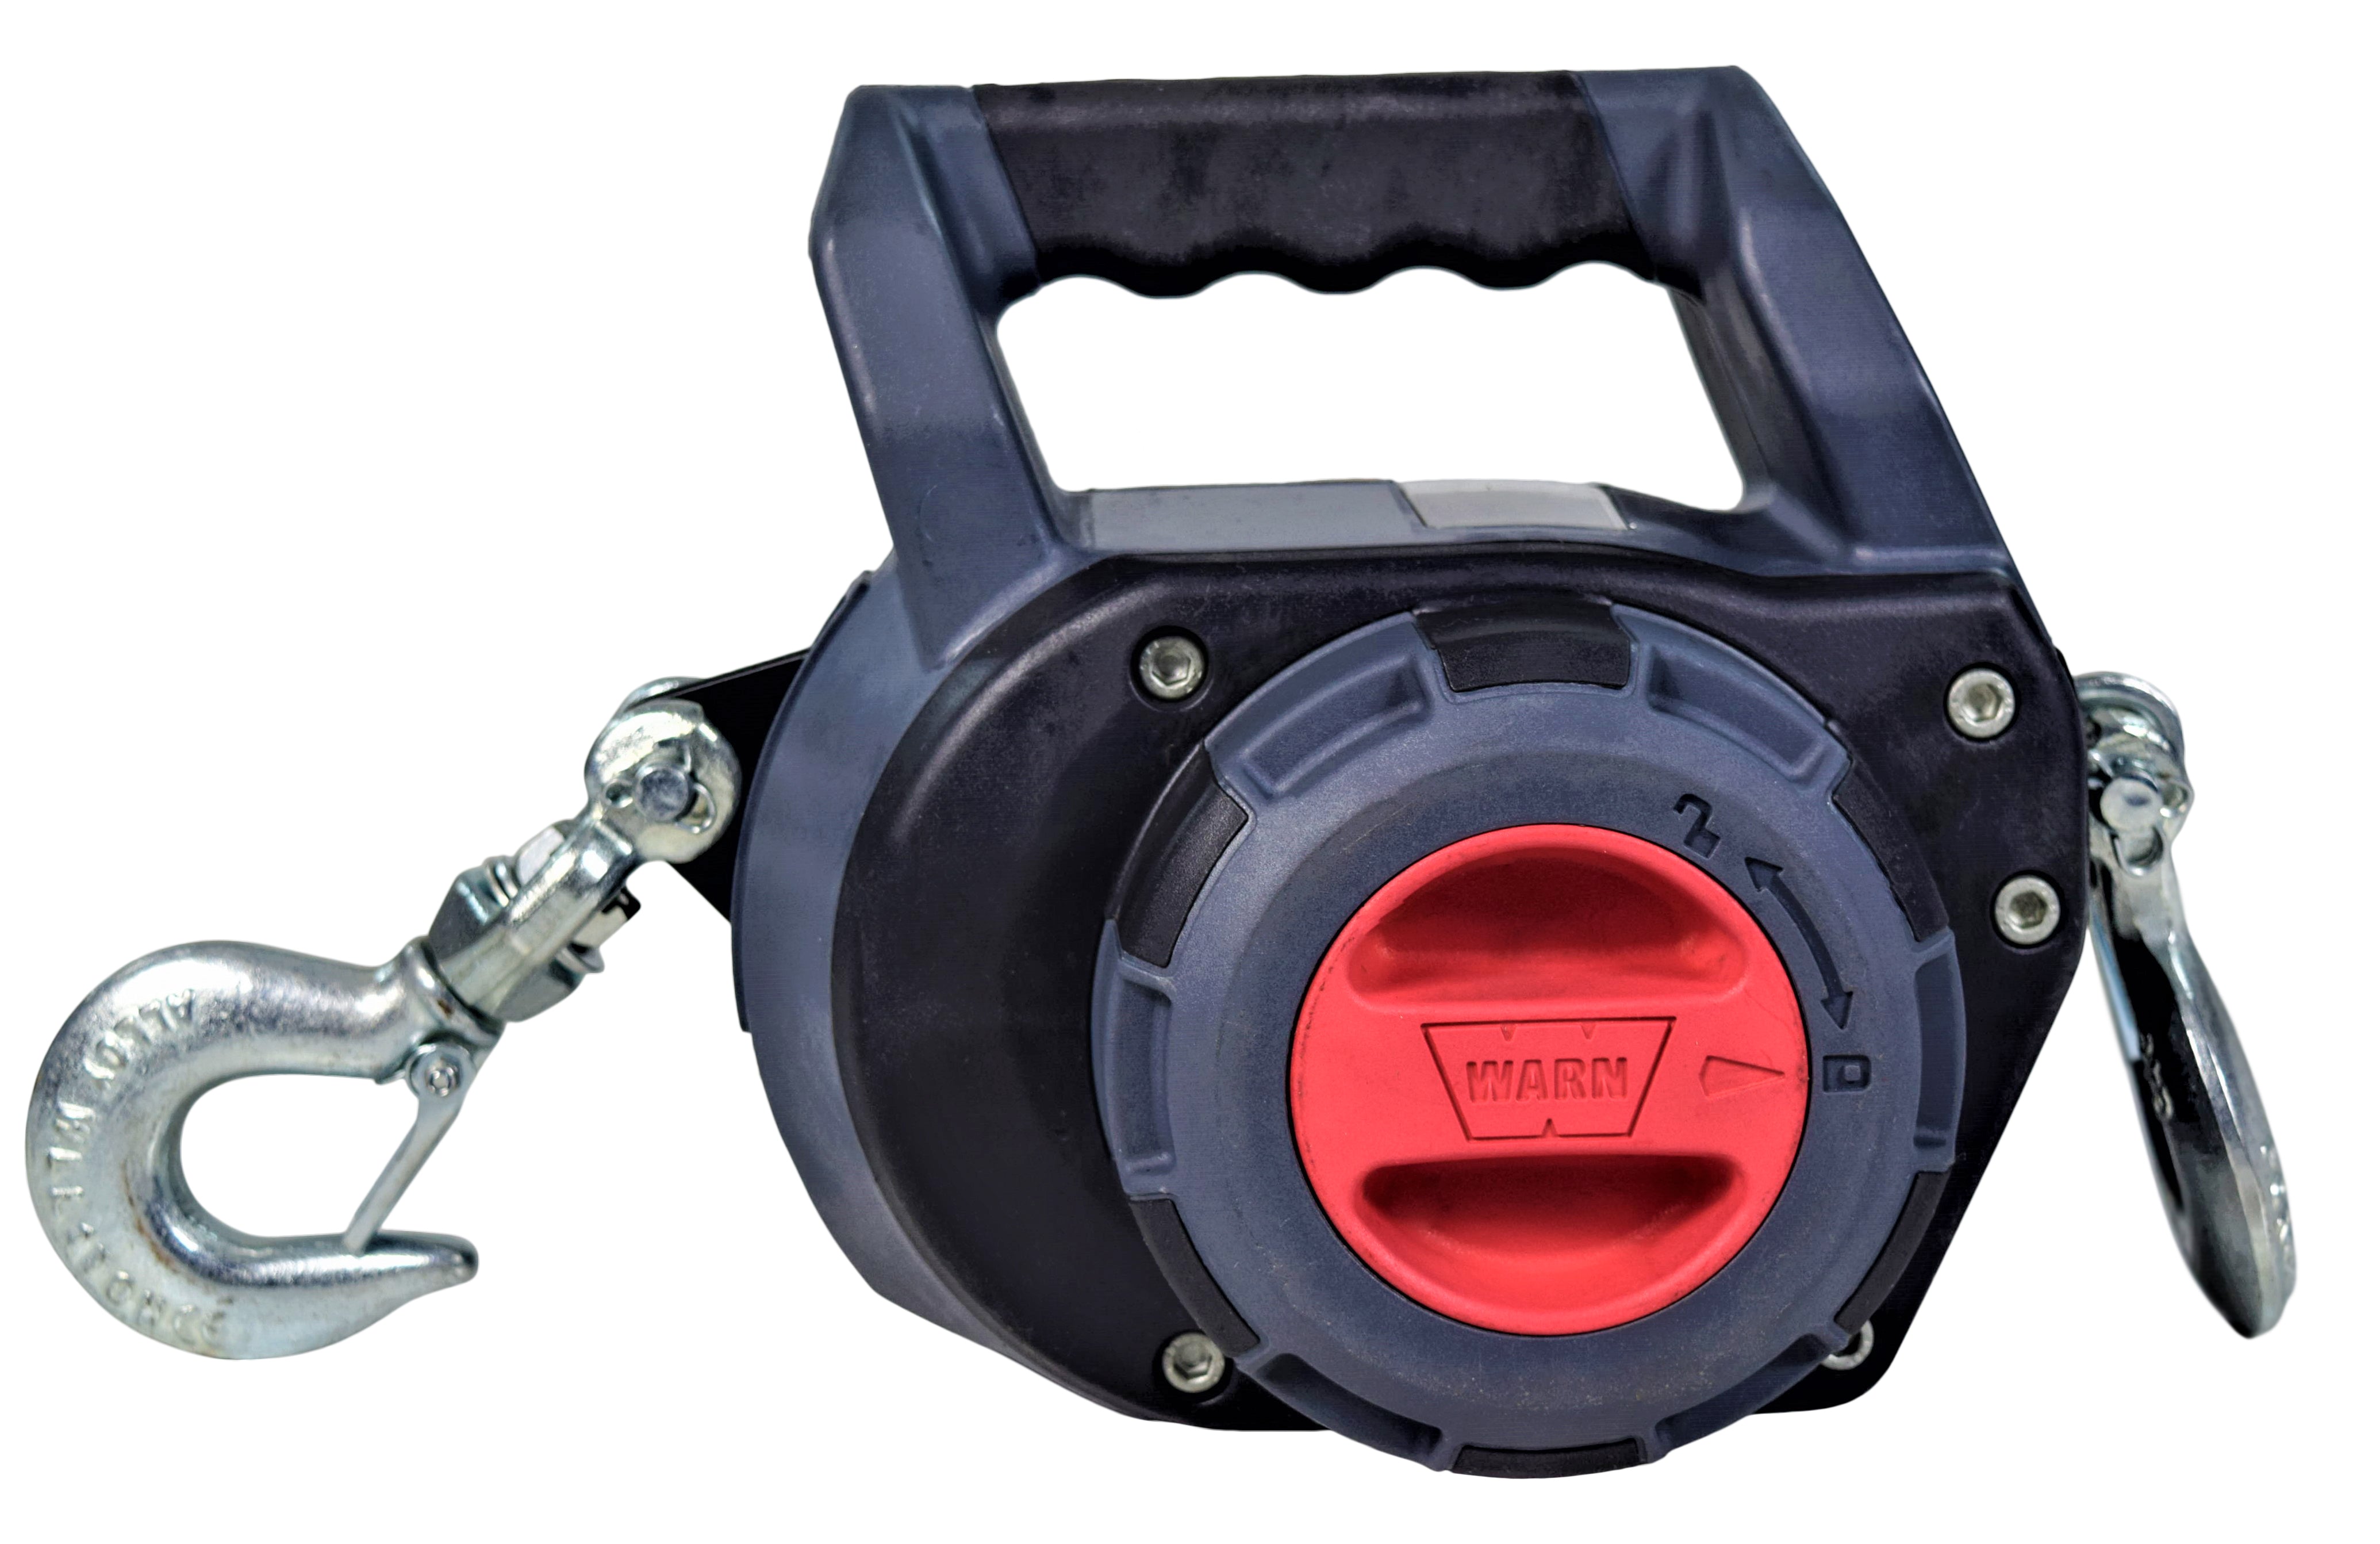 Warn 101570 Drill Winch 750 lbs Capacity 40' Synthetic Rope Free-spool  Clutch